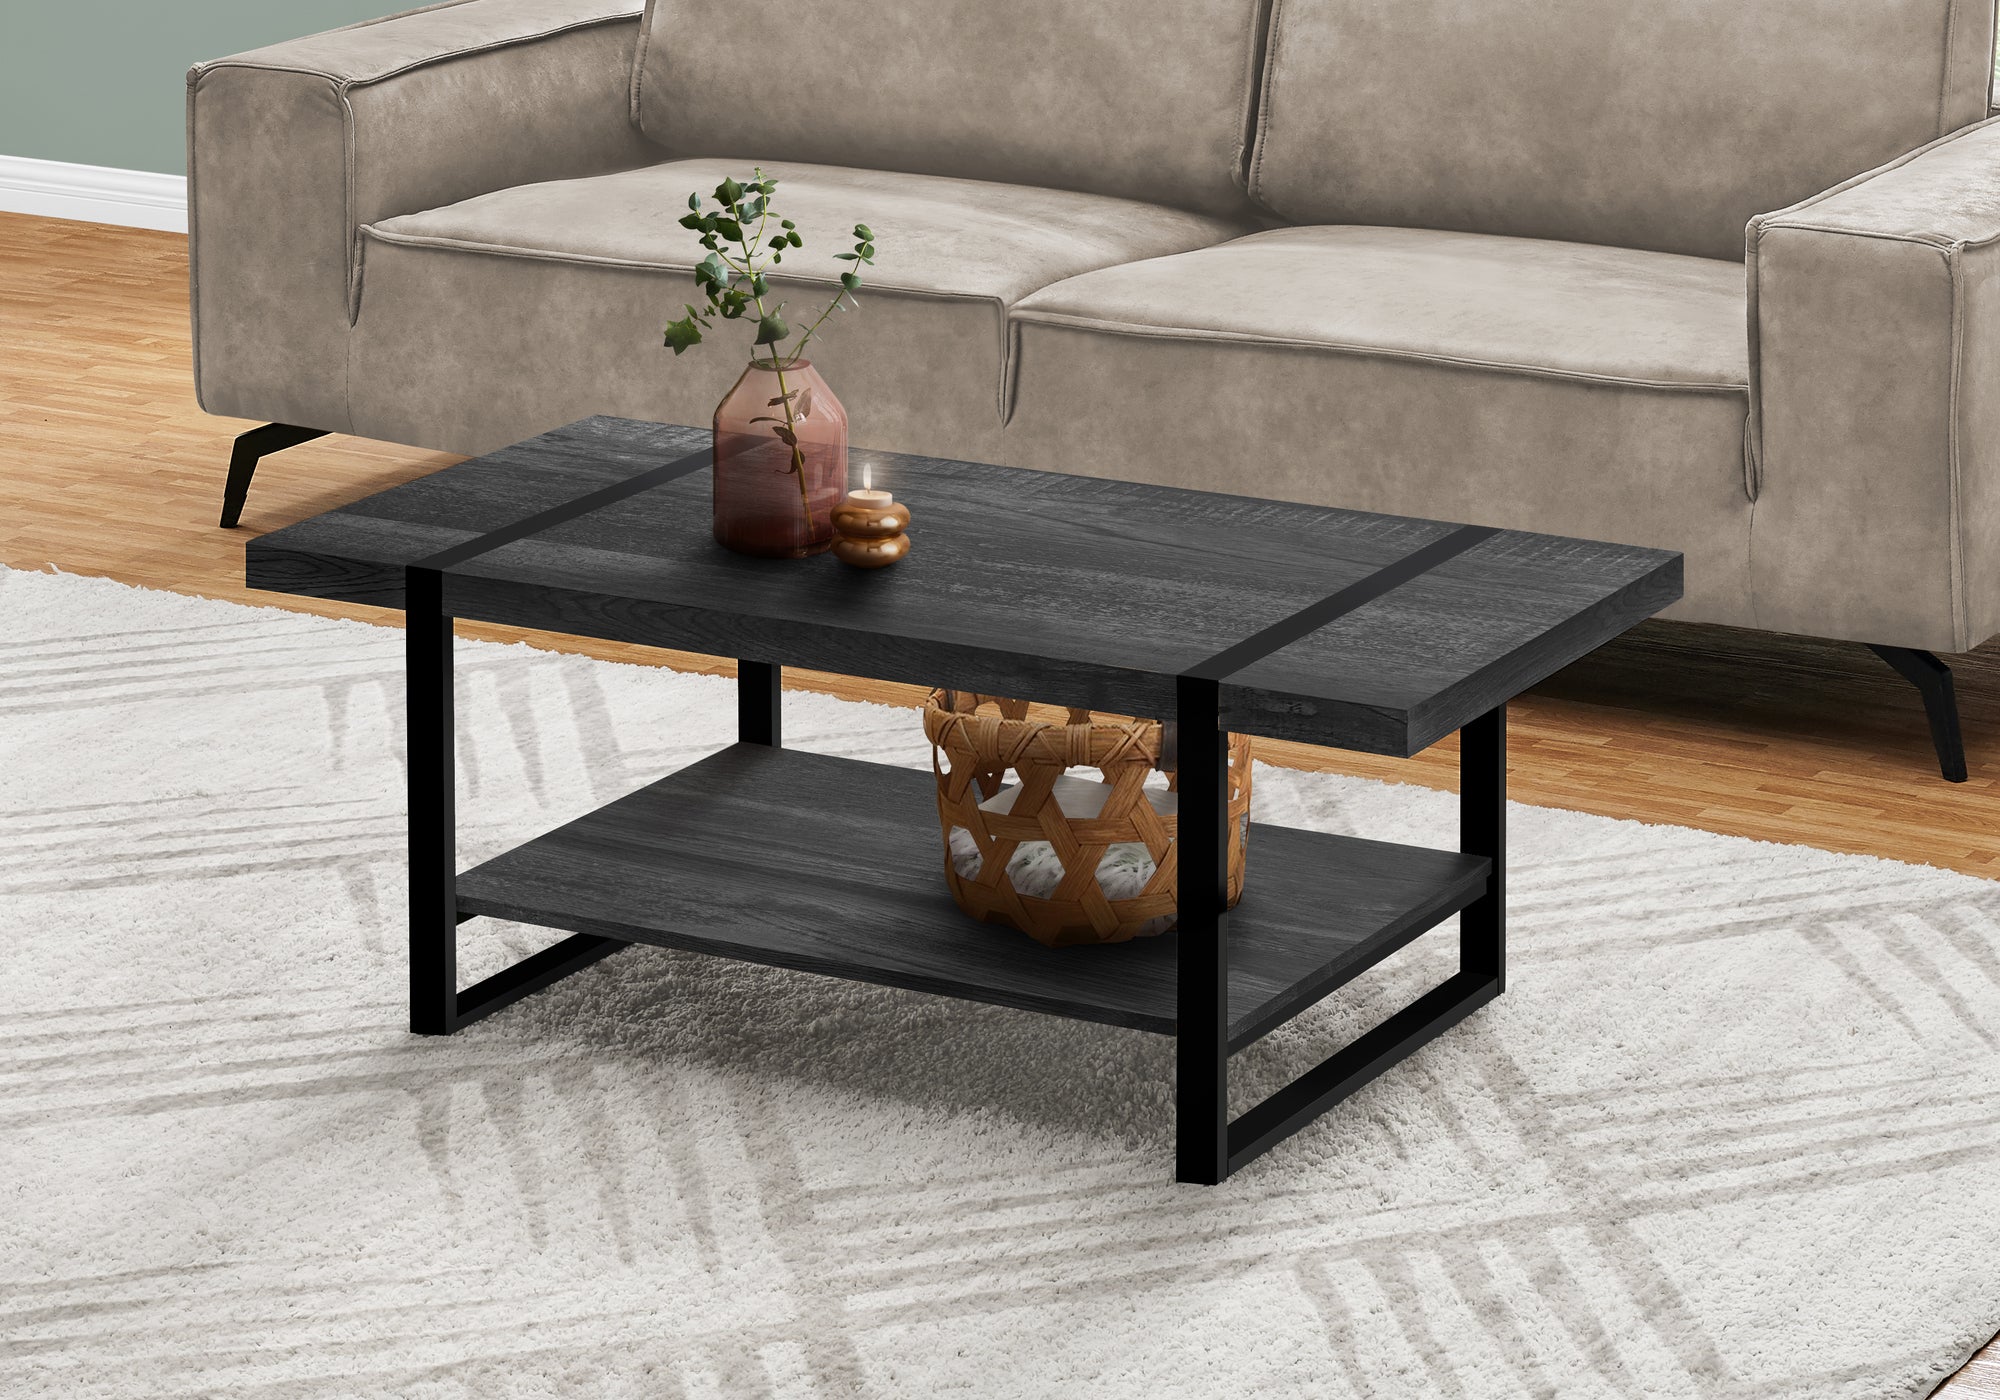 MN-632860    Coffee Table, Accent, Cocktail, Rectangular, Living Room, Metal Frame, Laminate, Black Reclaimed Wood Look, Black, Contemporary, Industrial, Modern